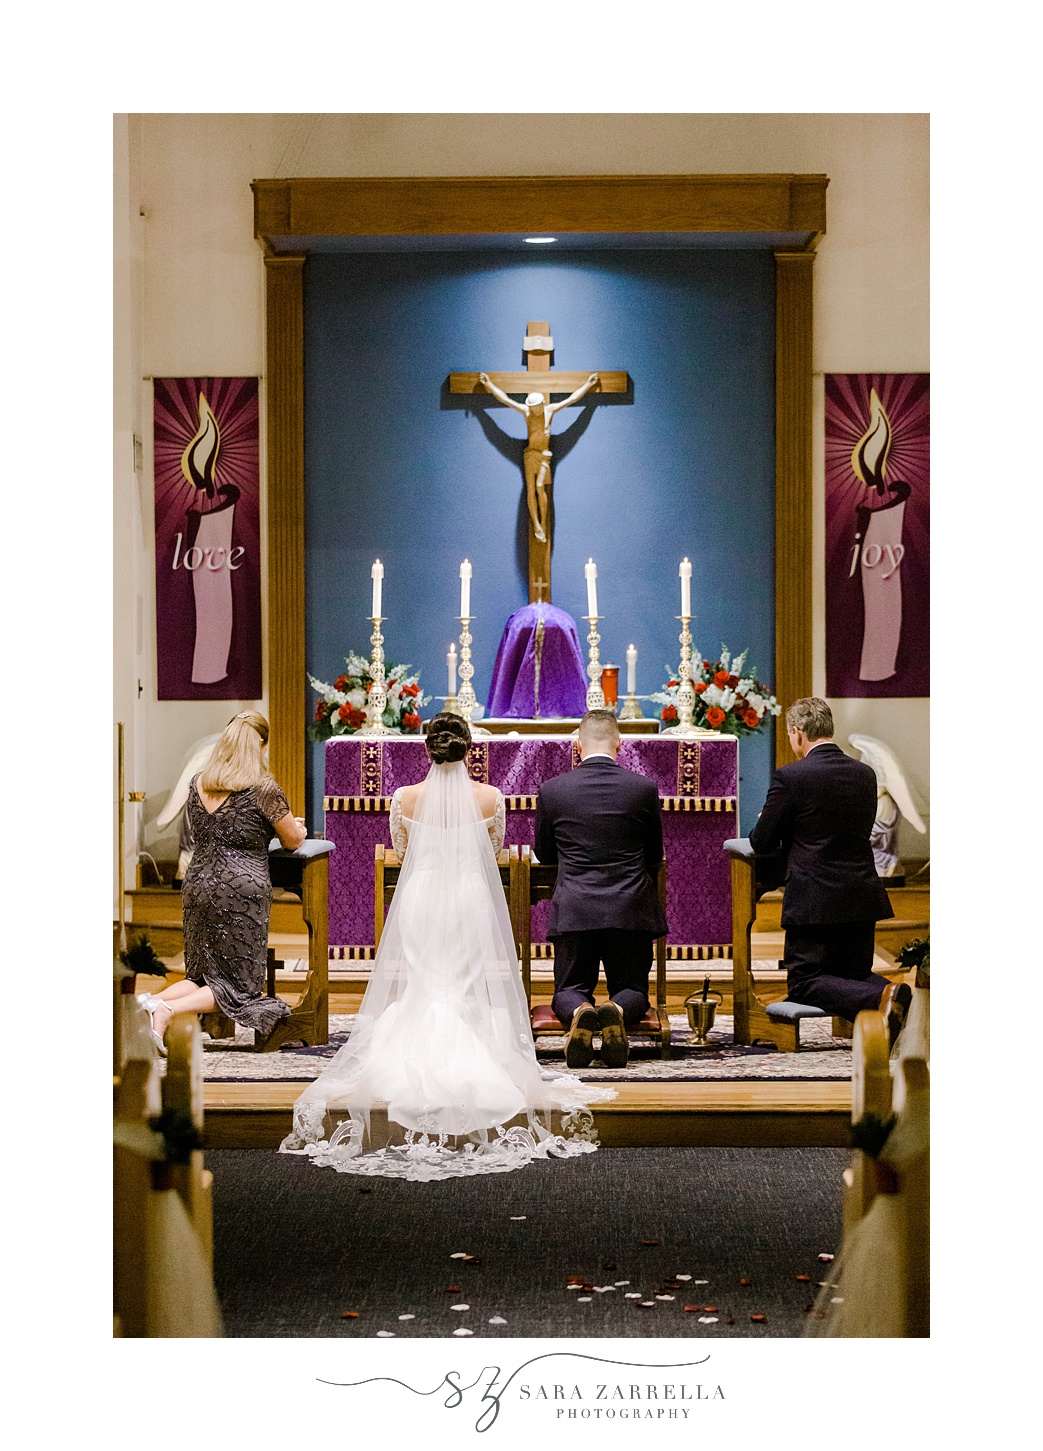 husband and wife kneel at alter with purple fabric during traditional Catholic ceremony in Rhode Island